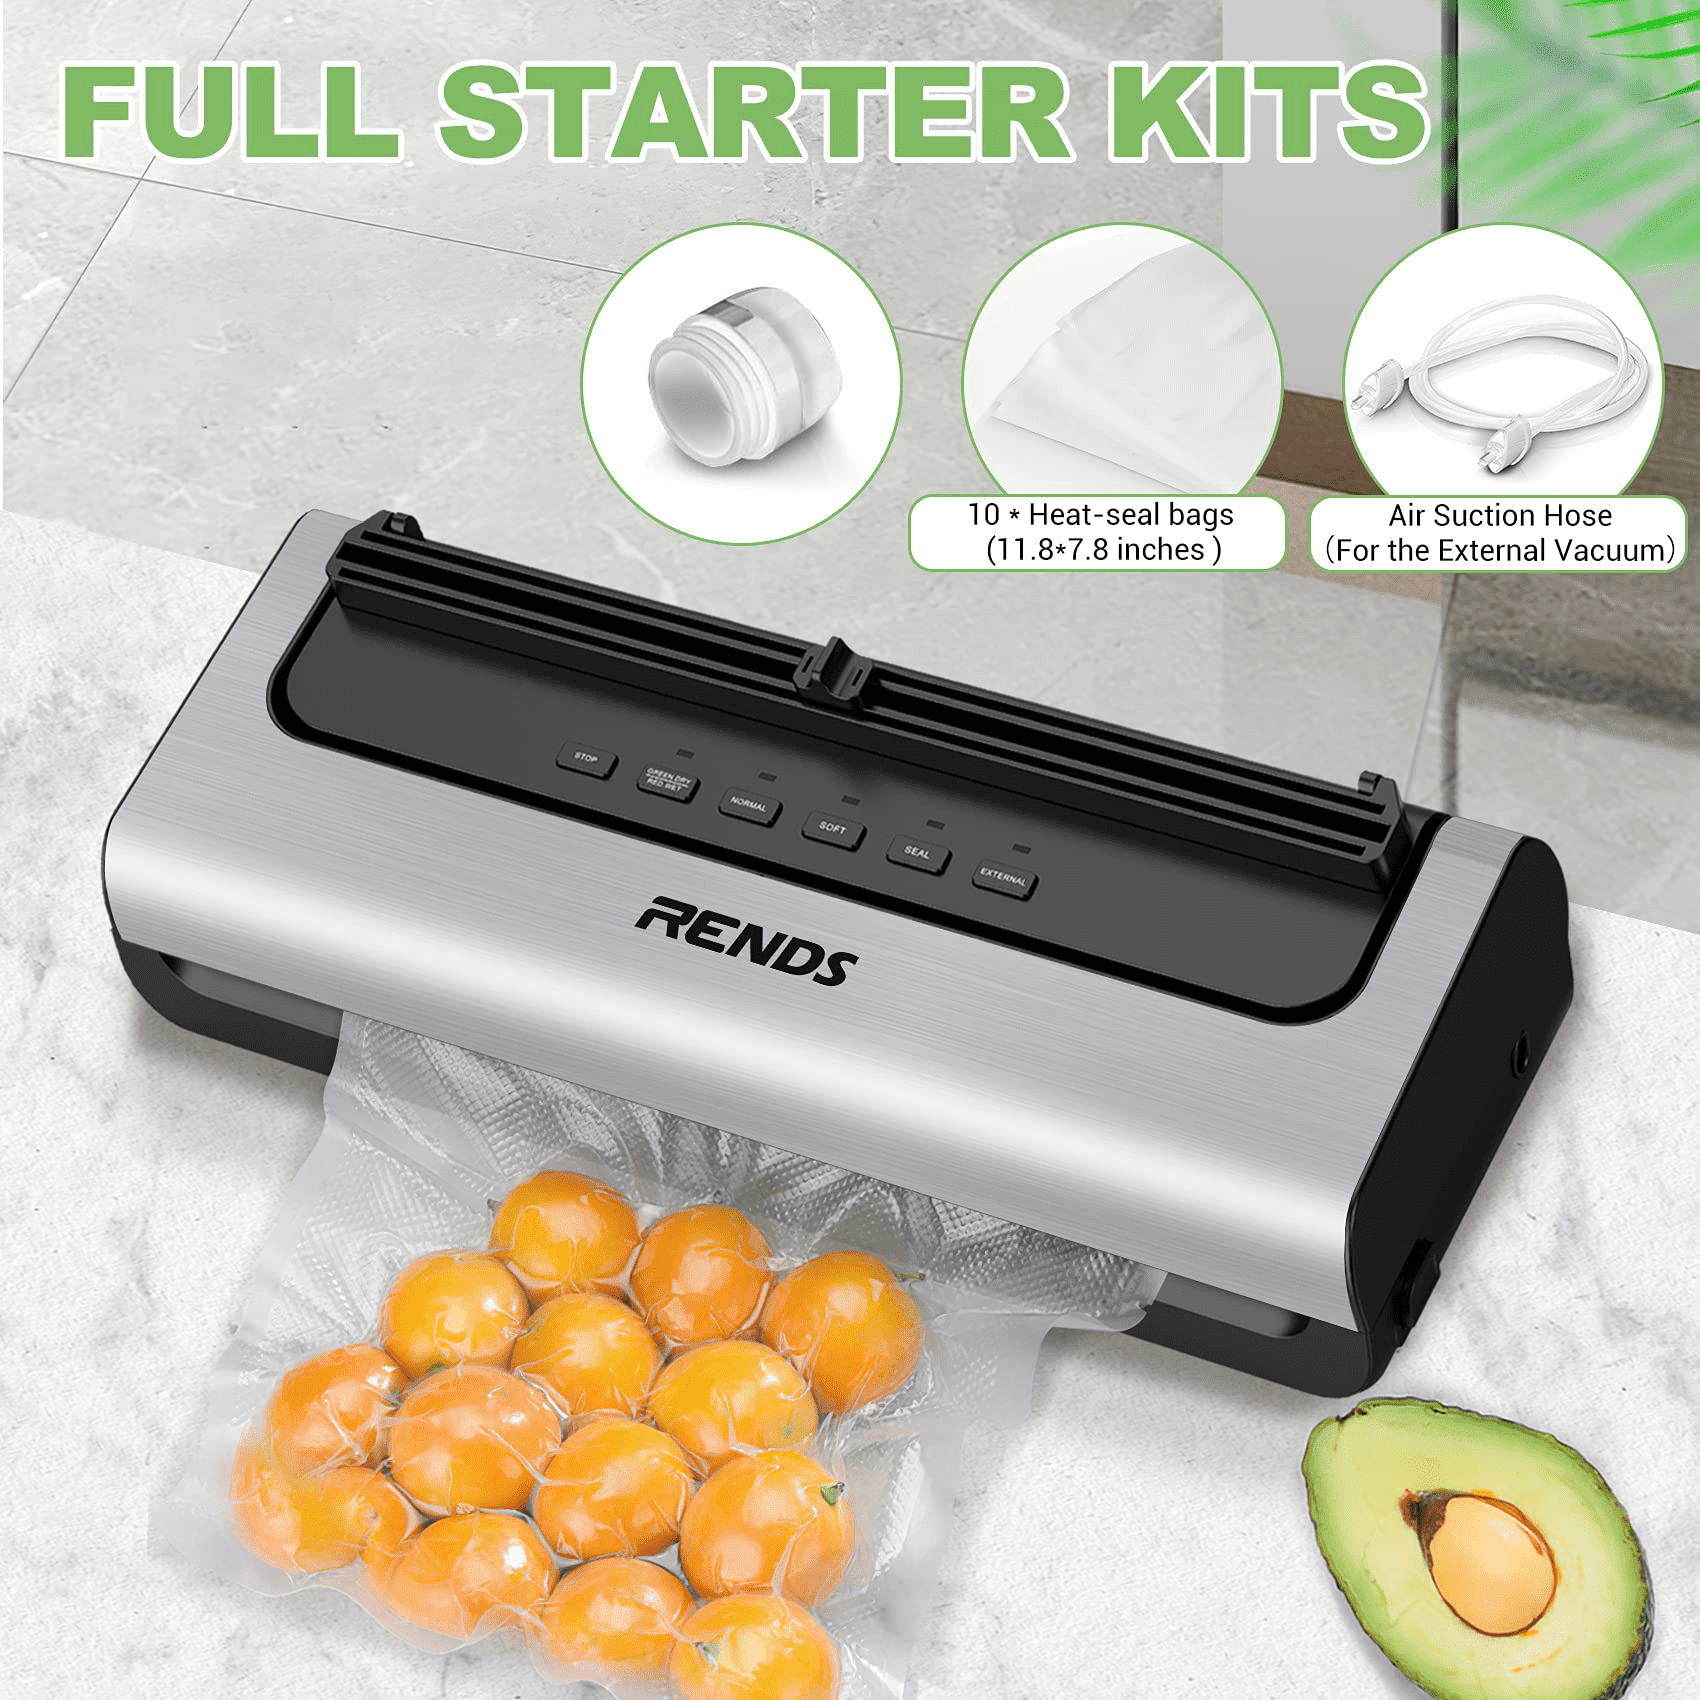 Aoresac Food Vacuum Sealer Machine for Food Saver Automatic Air Sealing  System for Food Storage Dry and Moist Food Modes Compact Design with 10Pcs  Seal Bags Starter Kit 